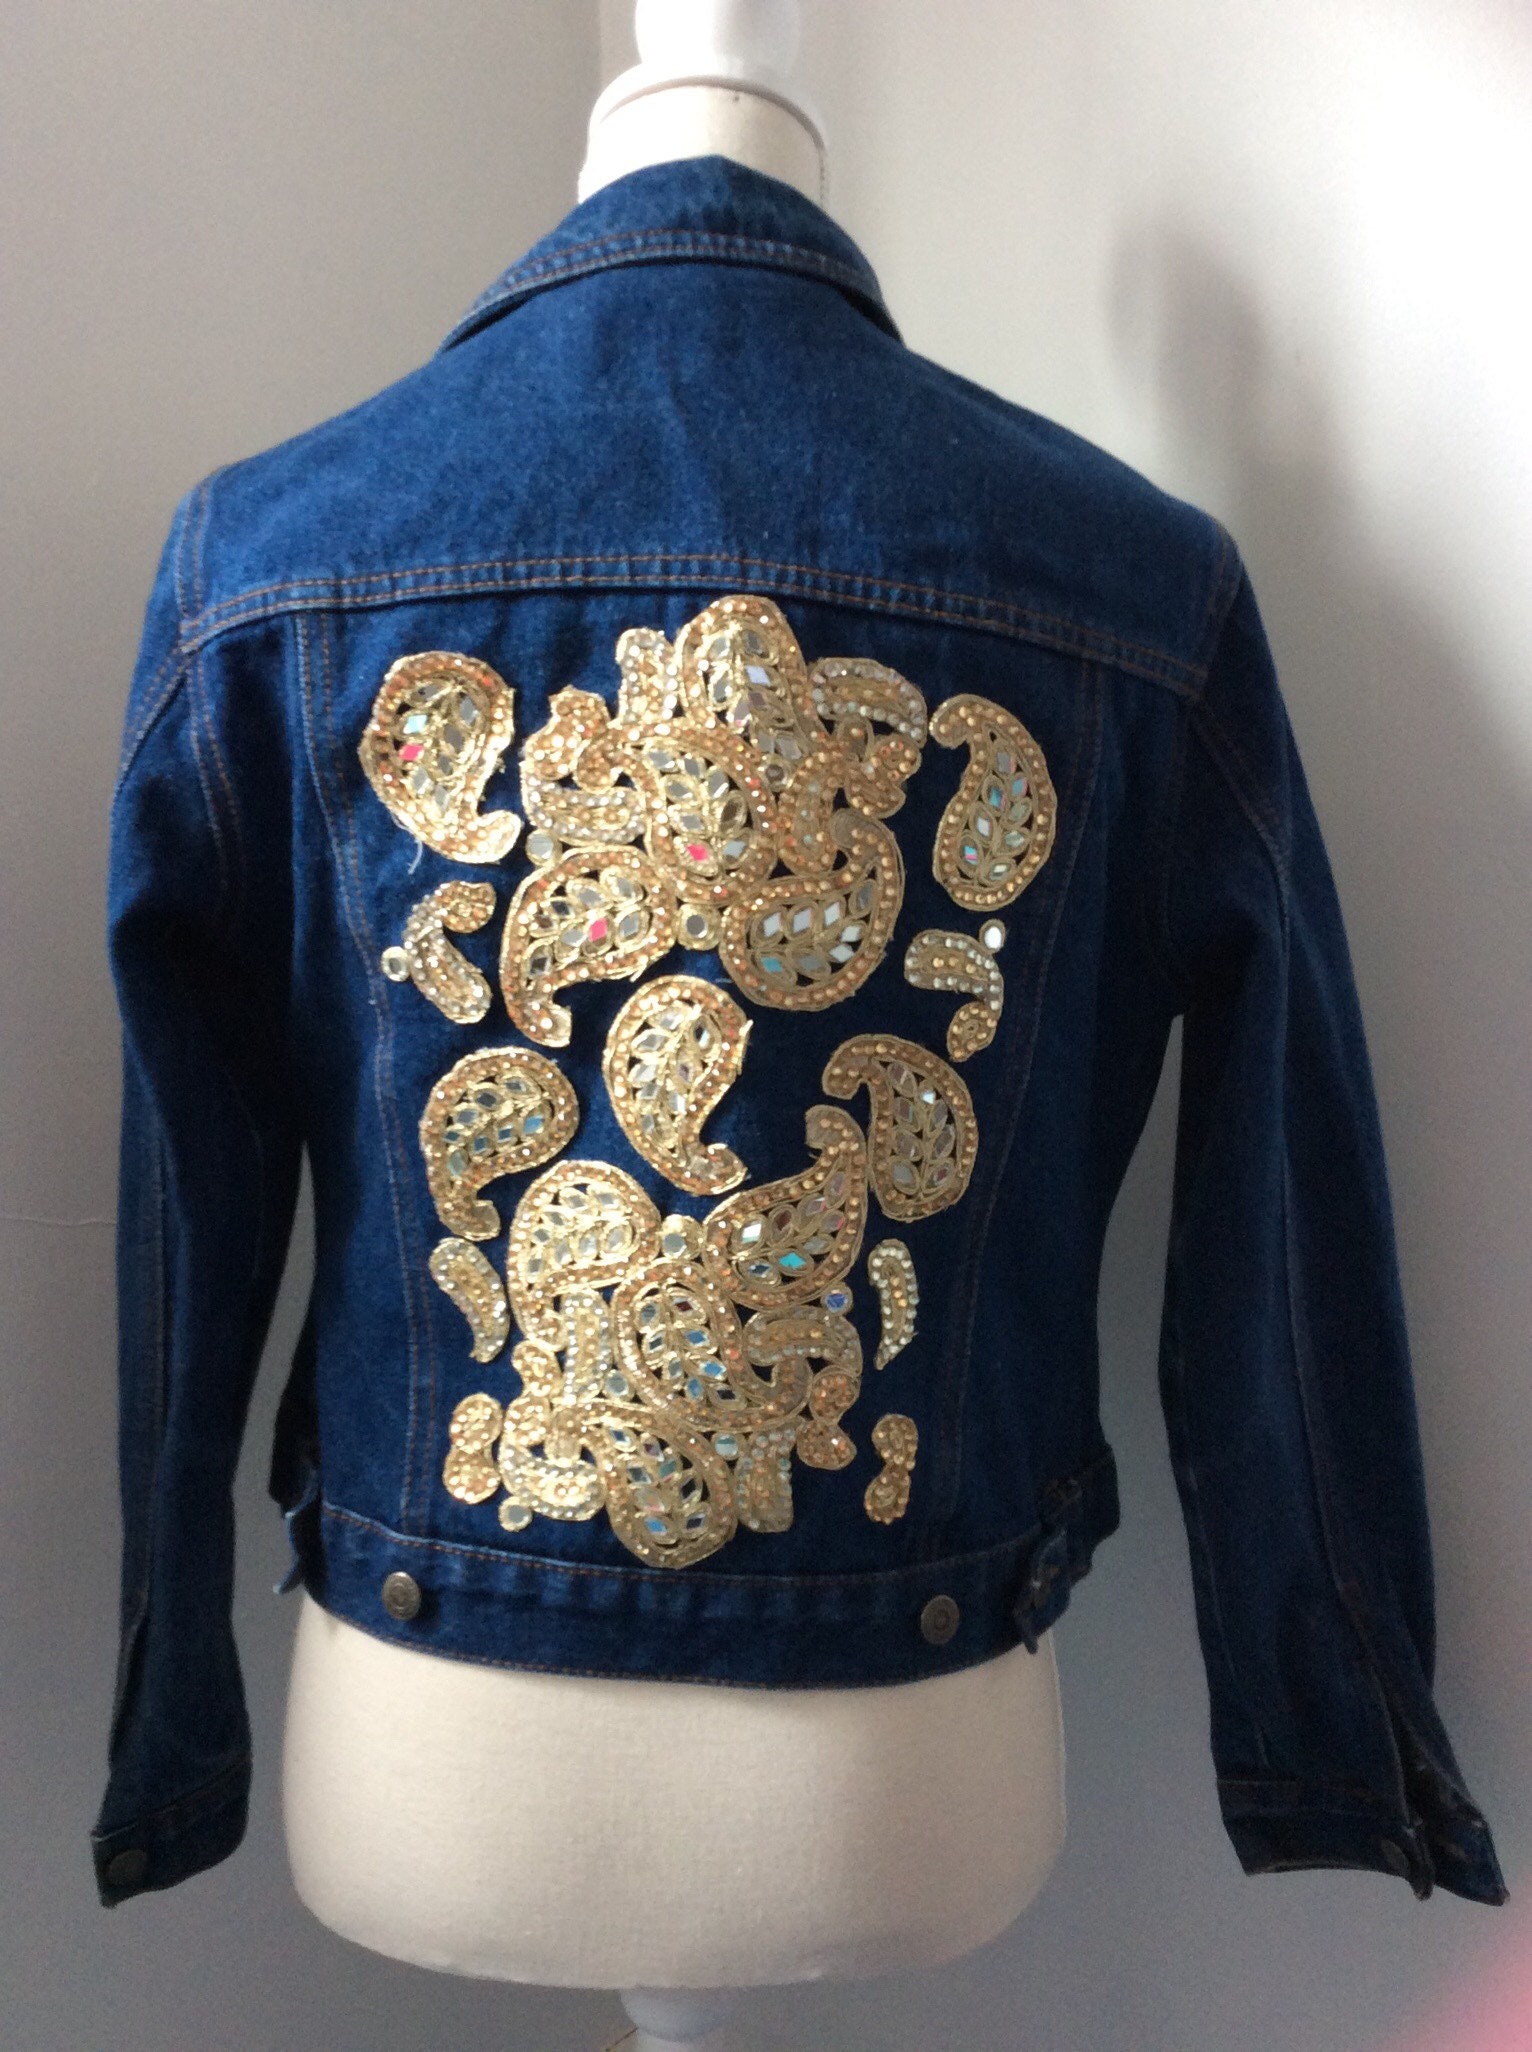 Denim Jacket Embellished With Crystals and Embroidery - Etsy